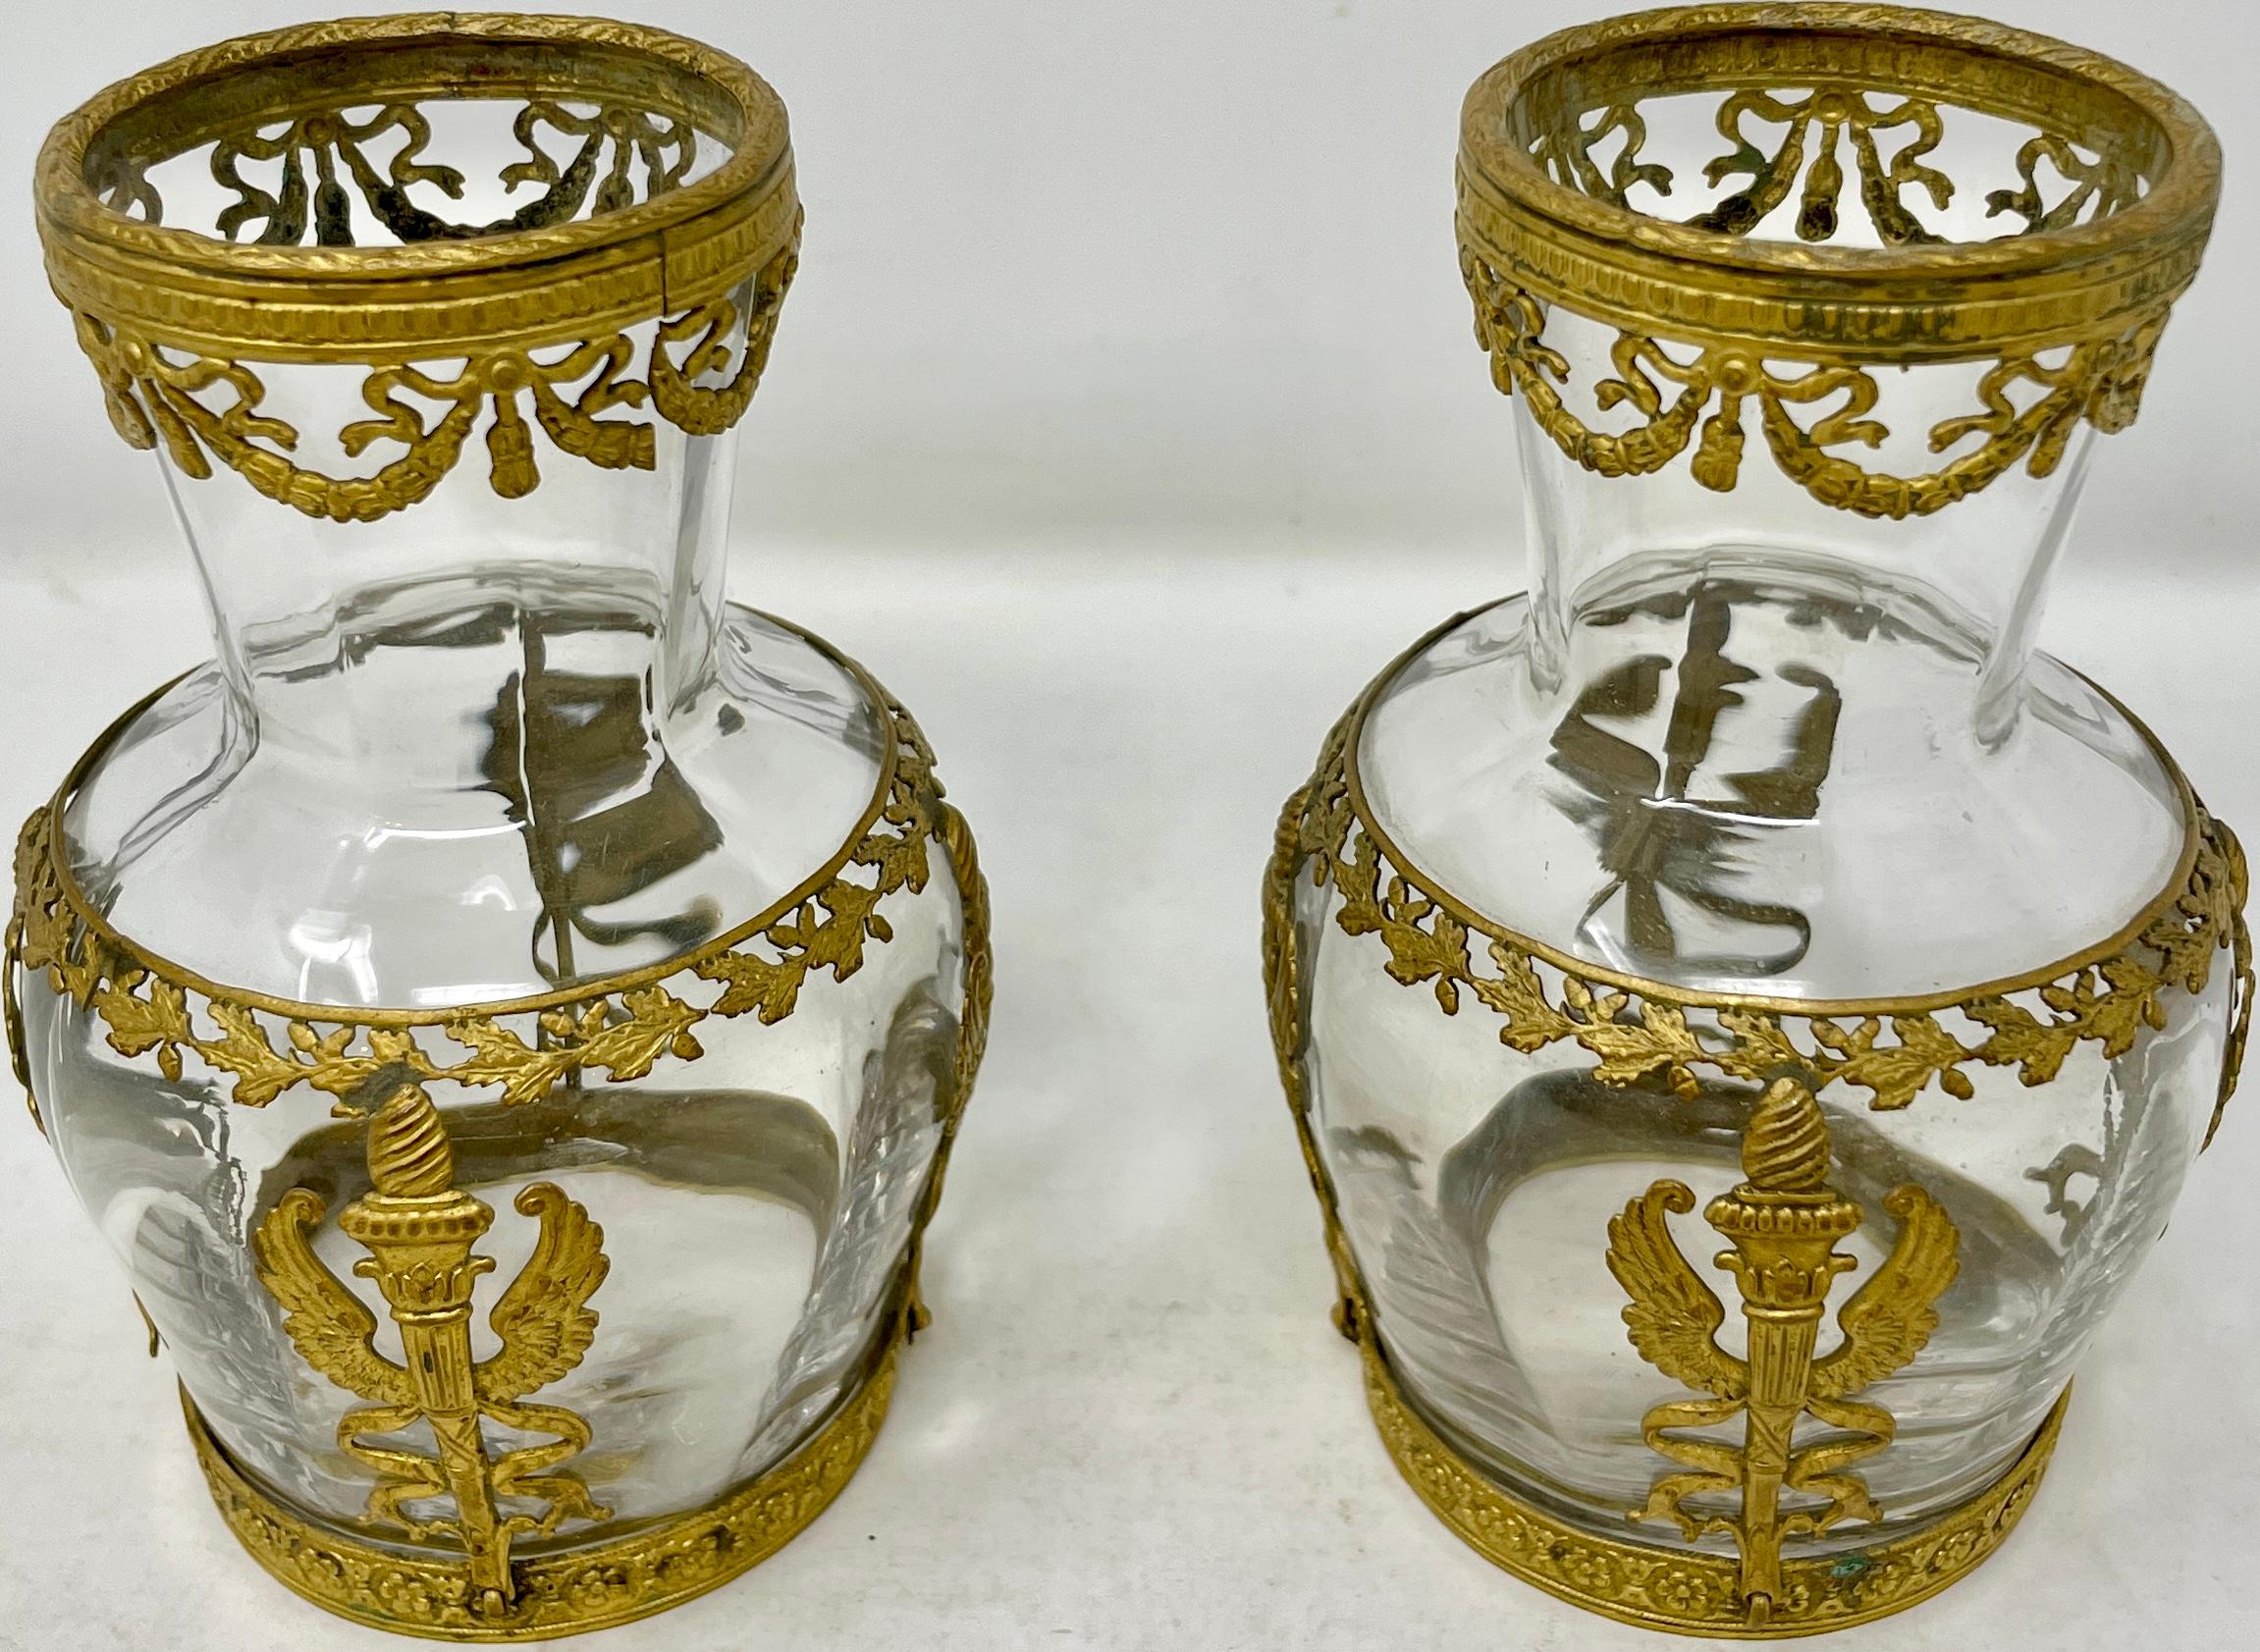 Pair antique French cut crystal bud vases with neoclassical bronze d'ore mounts, Circa 1900.